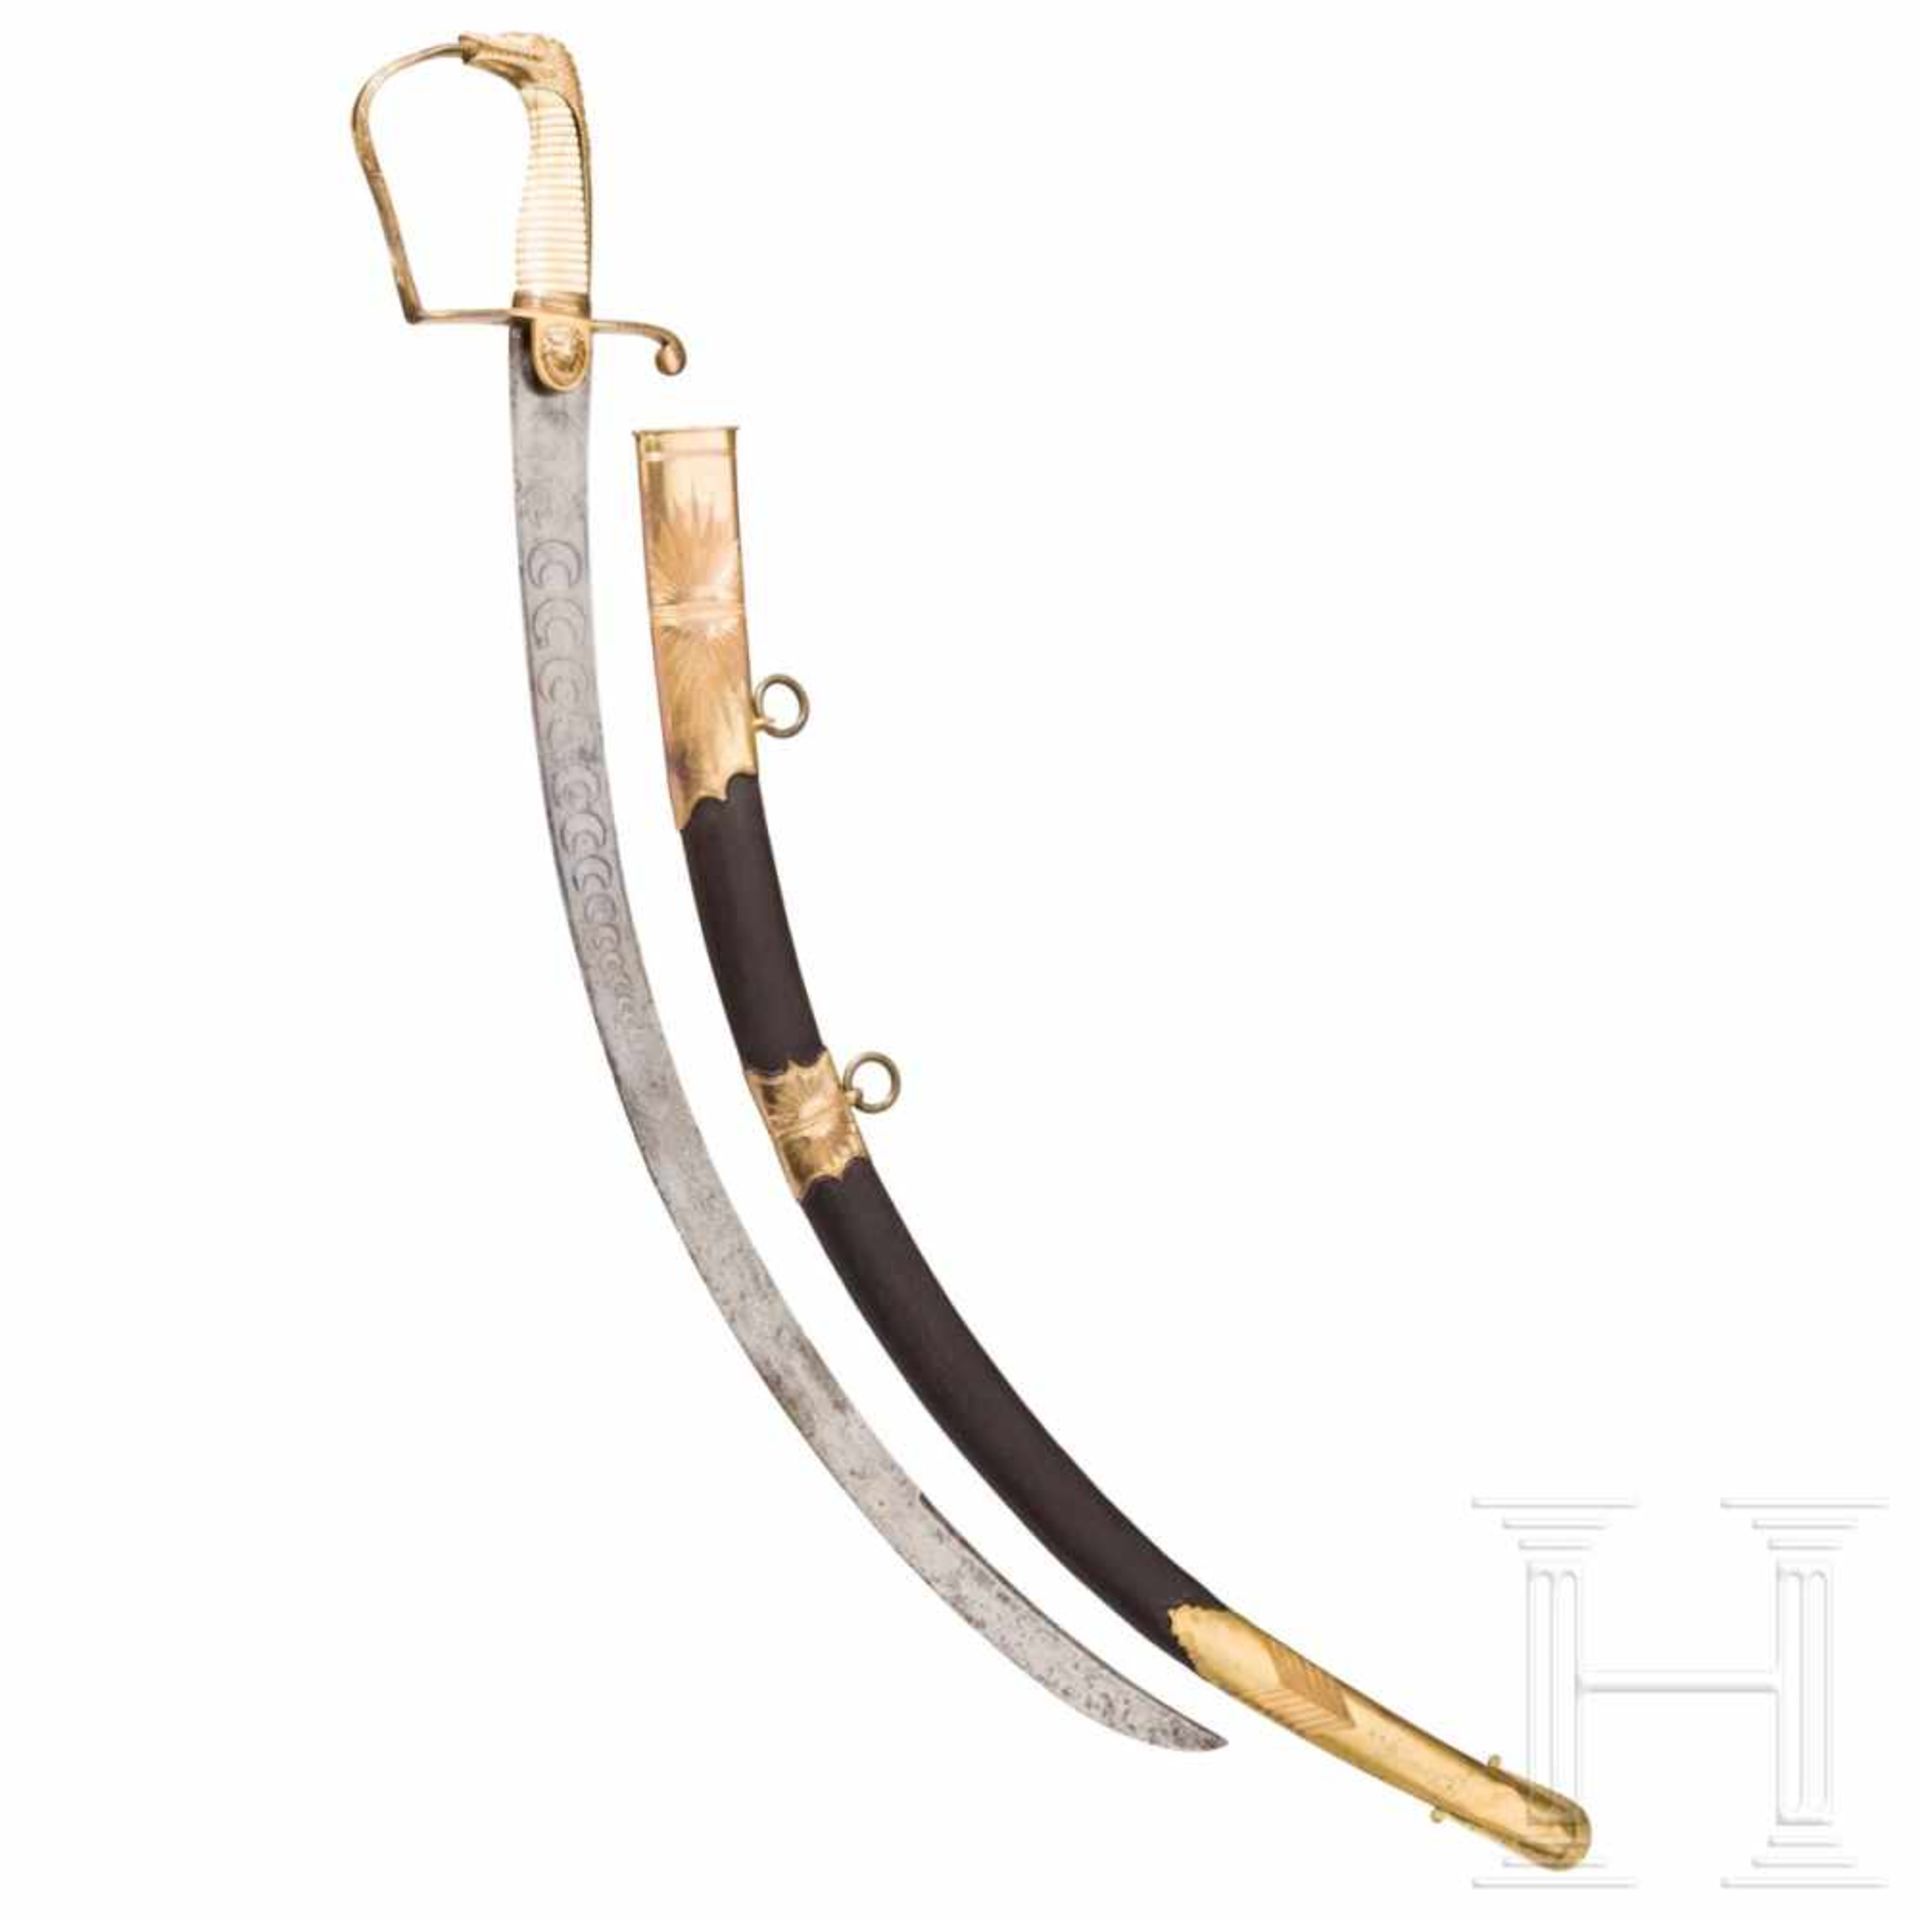 A sabre for officers of the Royal Navy in the style of the so-called “Nile swords“, 1798Distinctly